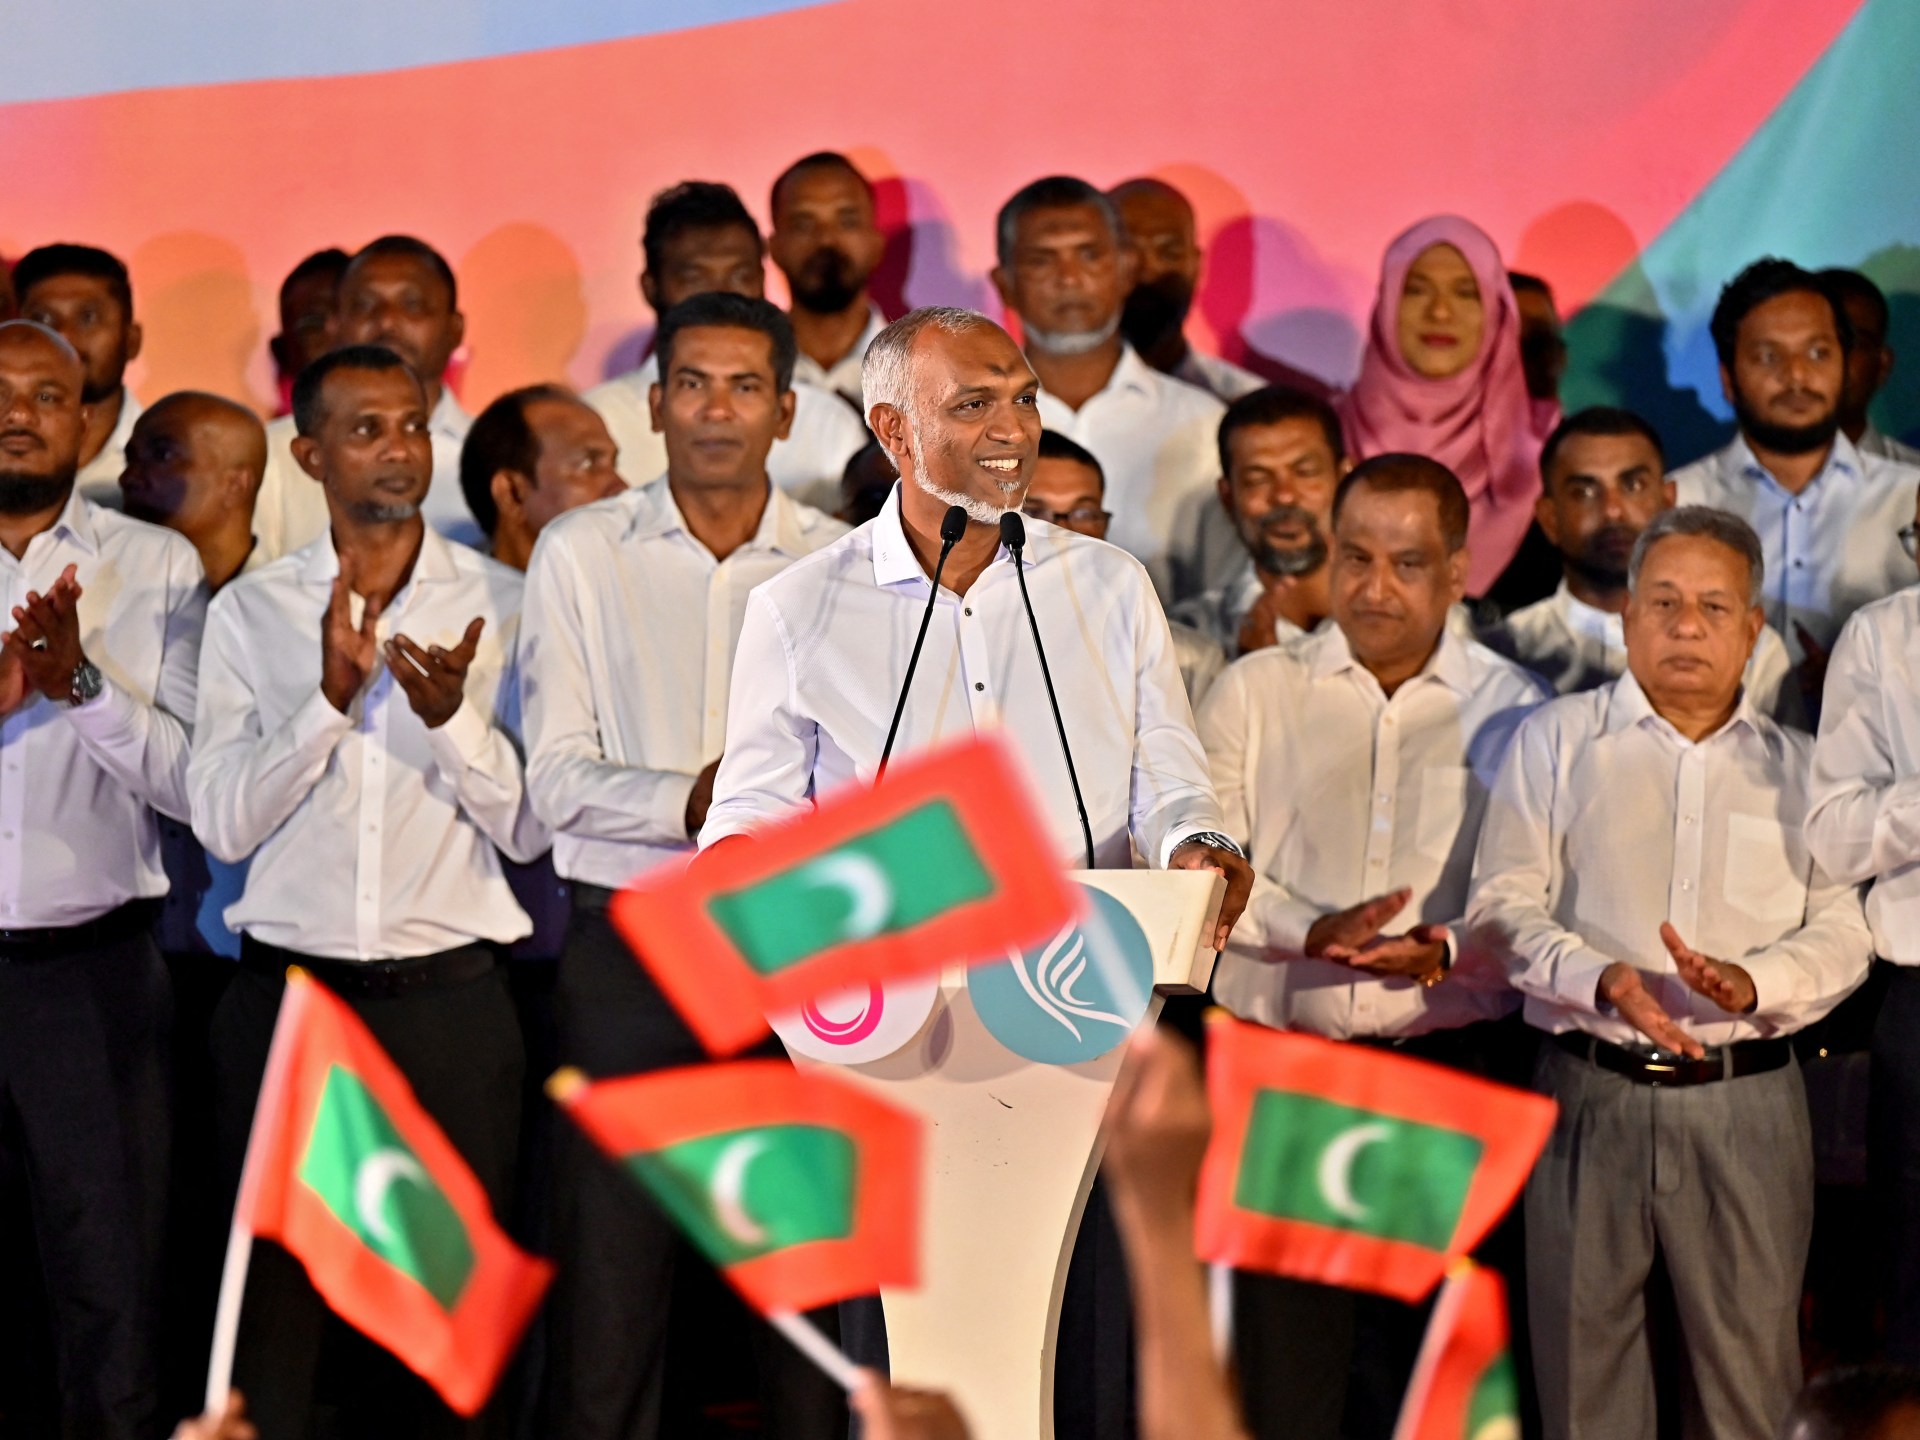 ‘Absolute power’: After pro-China Maldives leader’s big win, what’s next? | Elections News